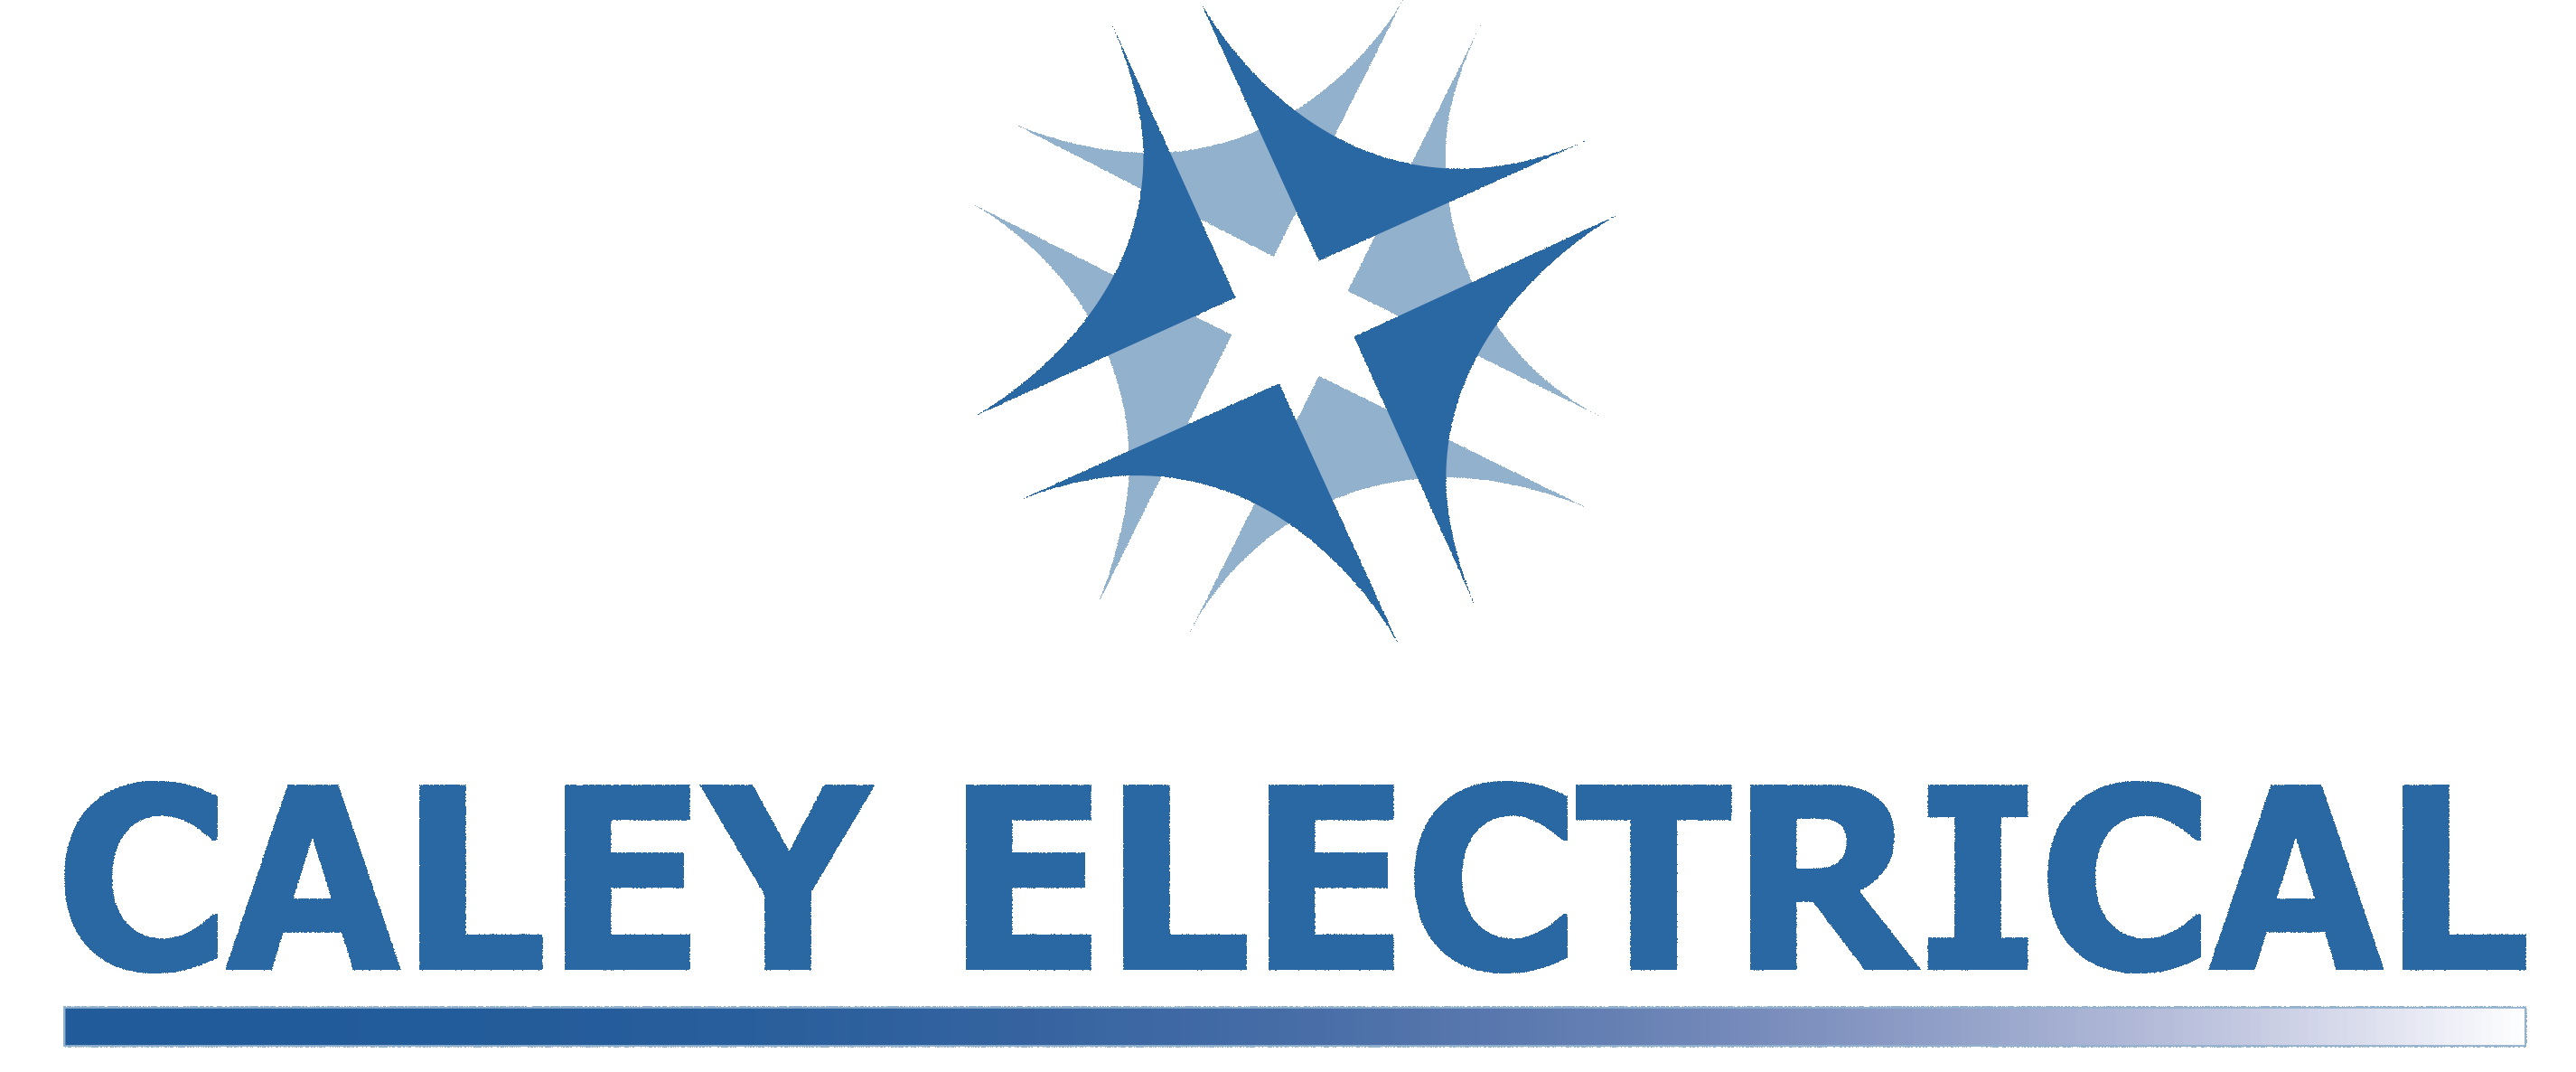 Caley Electrical